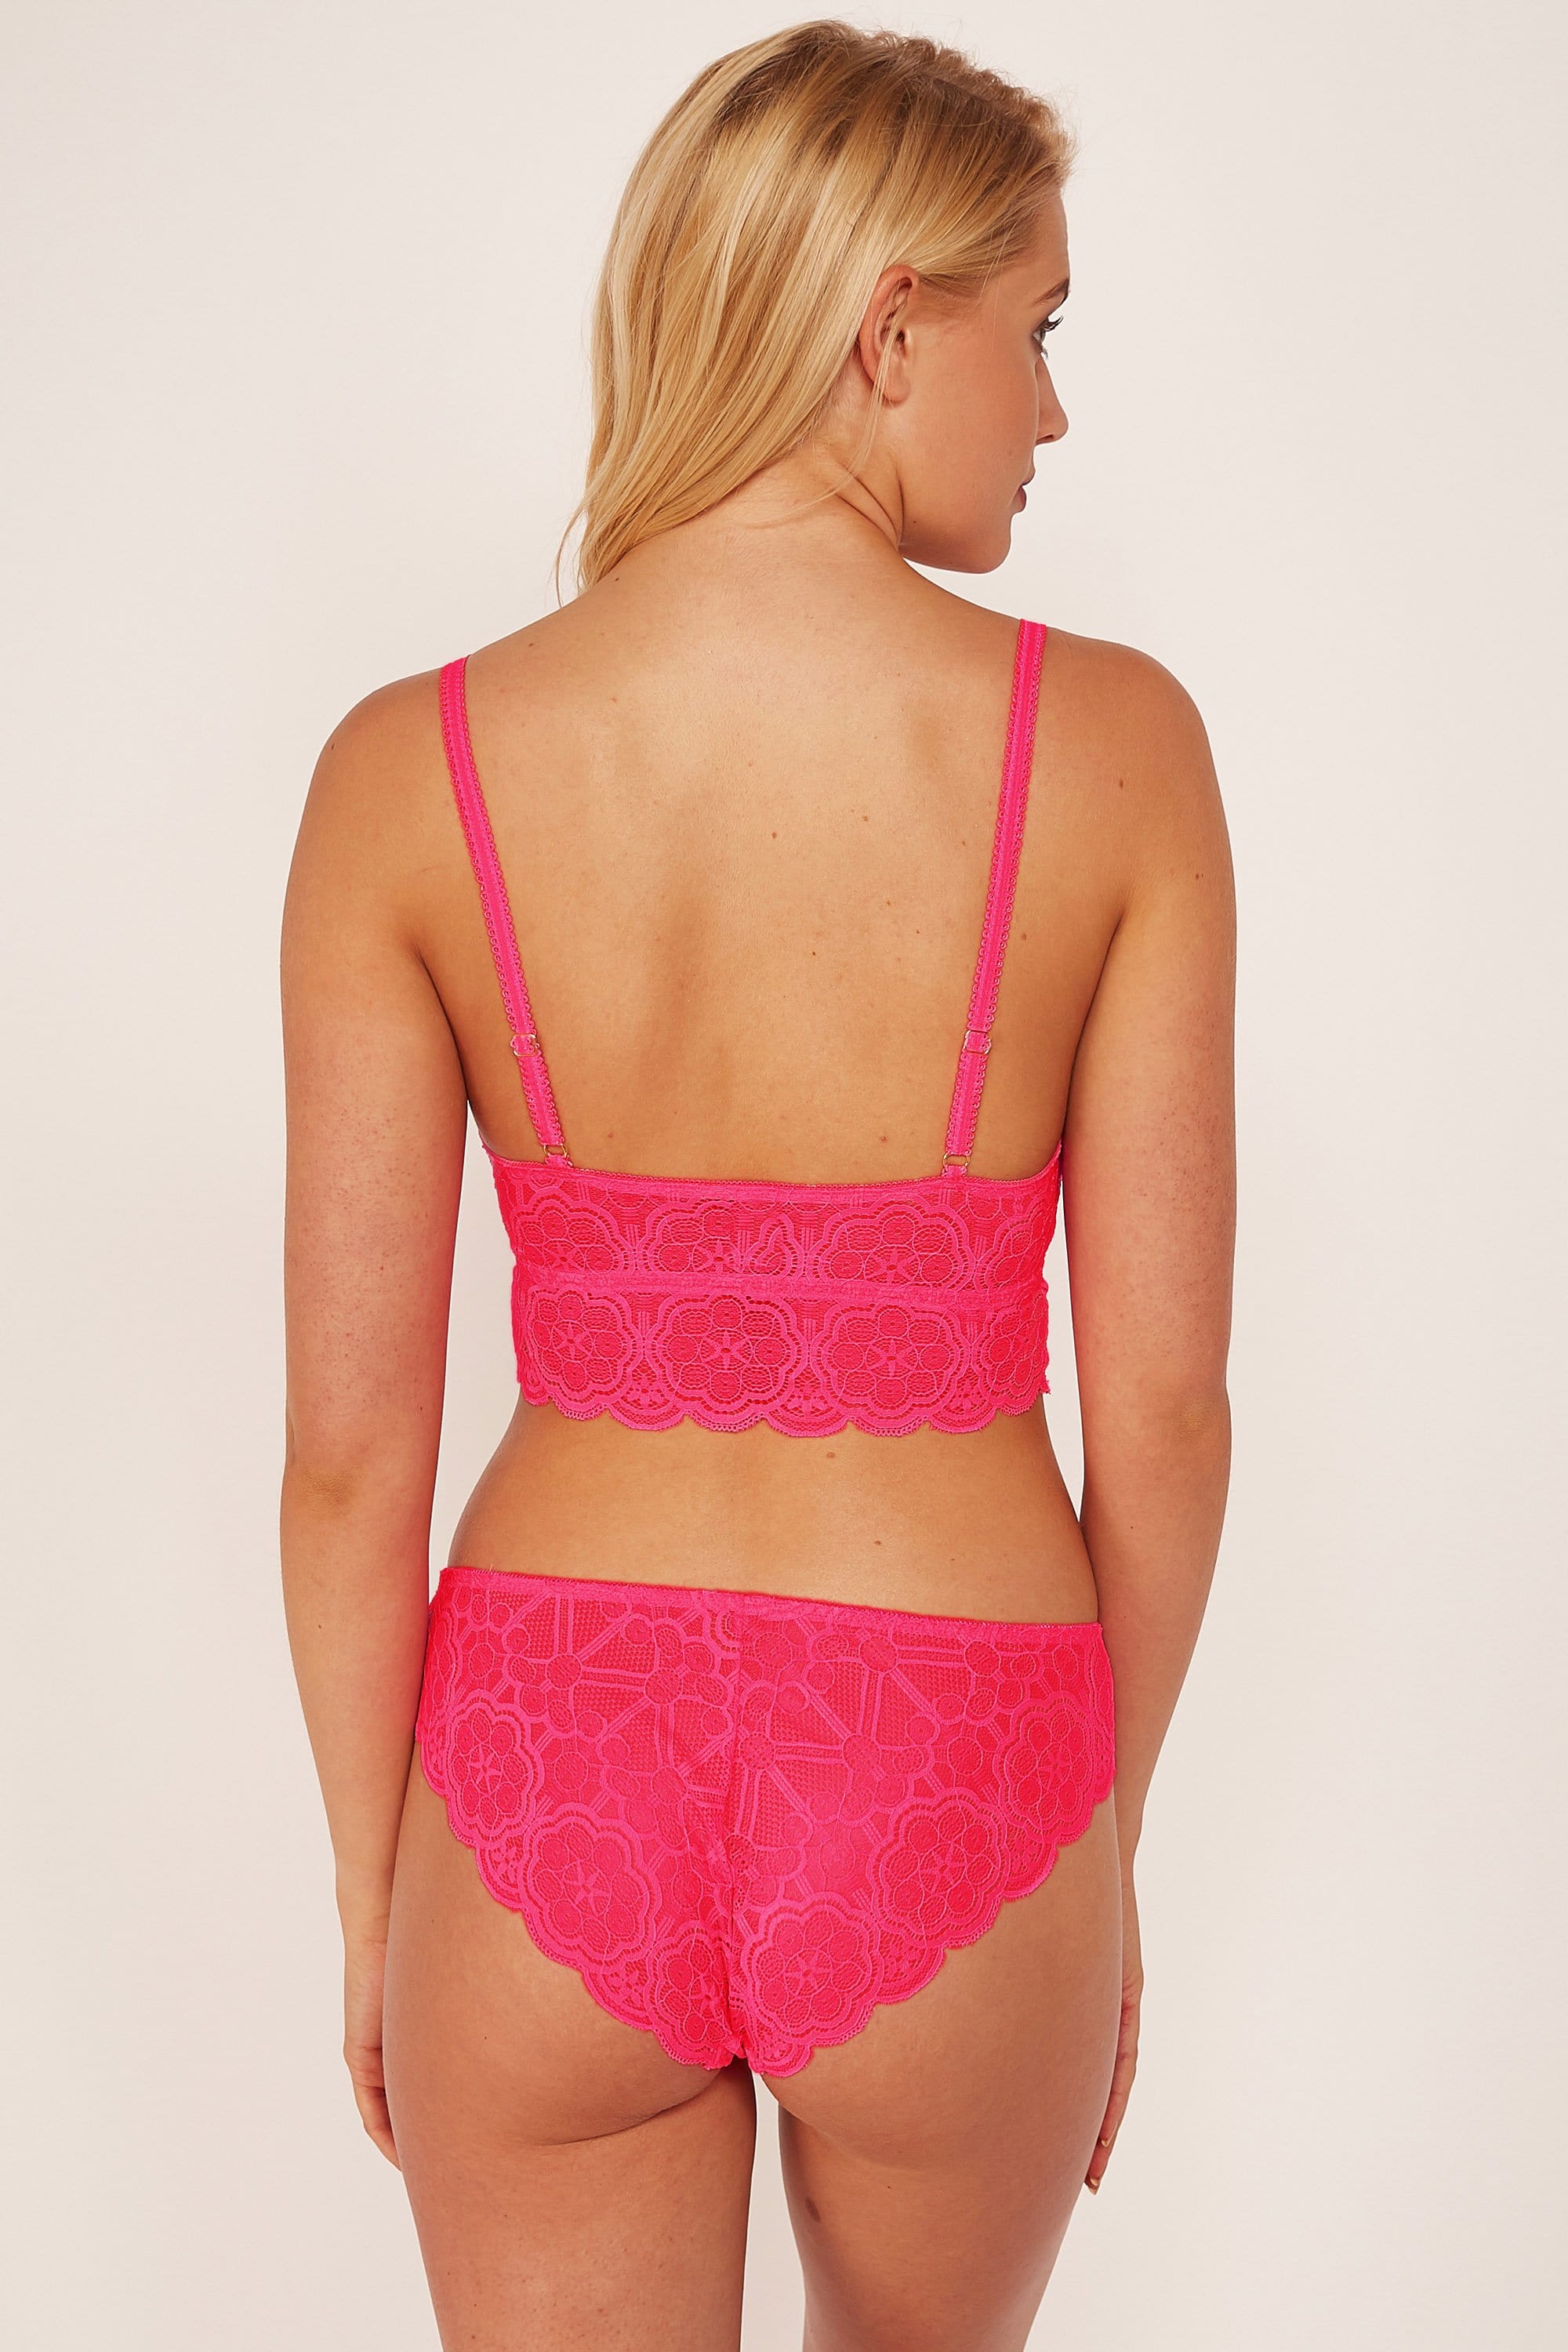 Ariana Lace Neon Pink Bralette